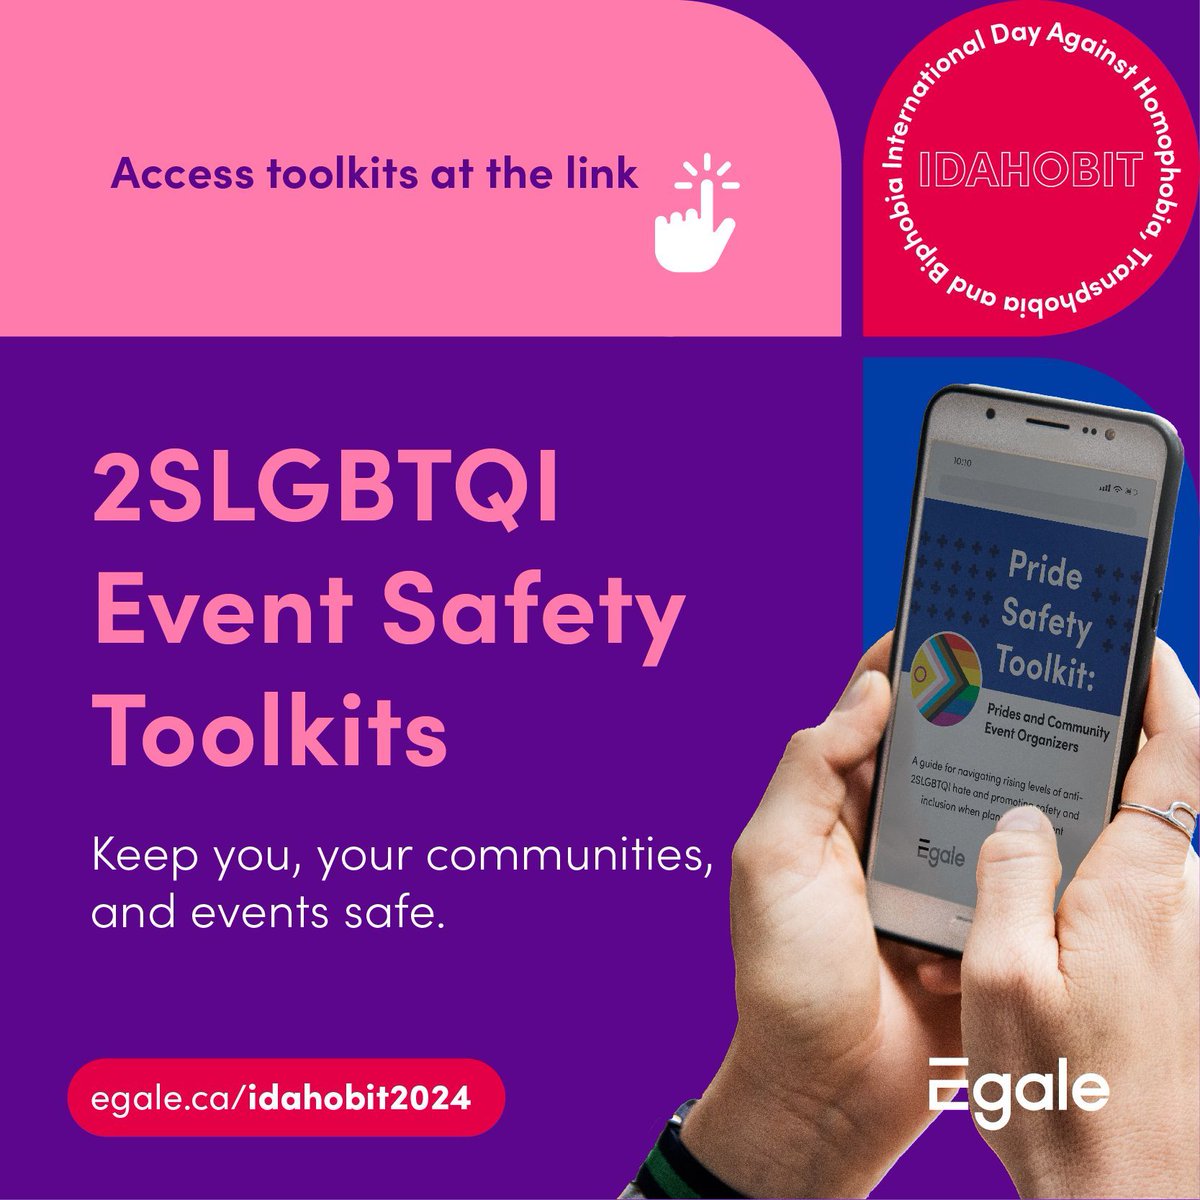 There has been an exponential rise in anti-2SLGBTQI, hate-fueled, and gender-critical movements across Canada. Equip yourself with information and resources that help keep you, your communities, and events safe. Use this resource and more at egale.ca/idahobit2024